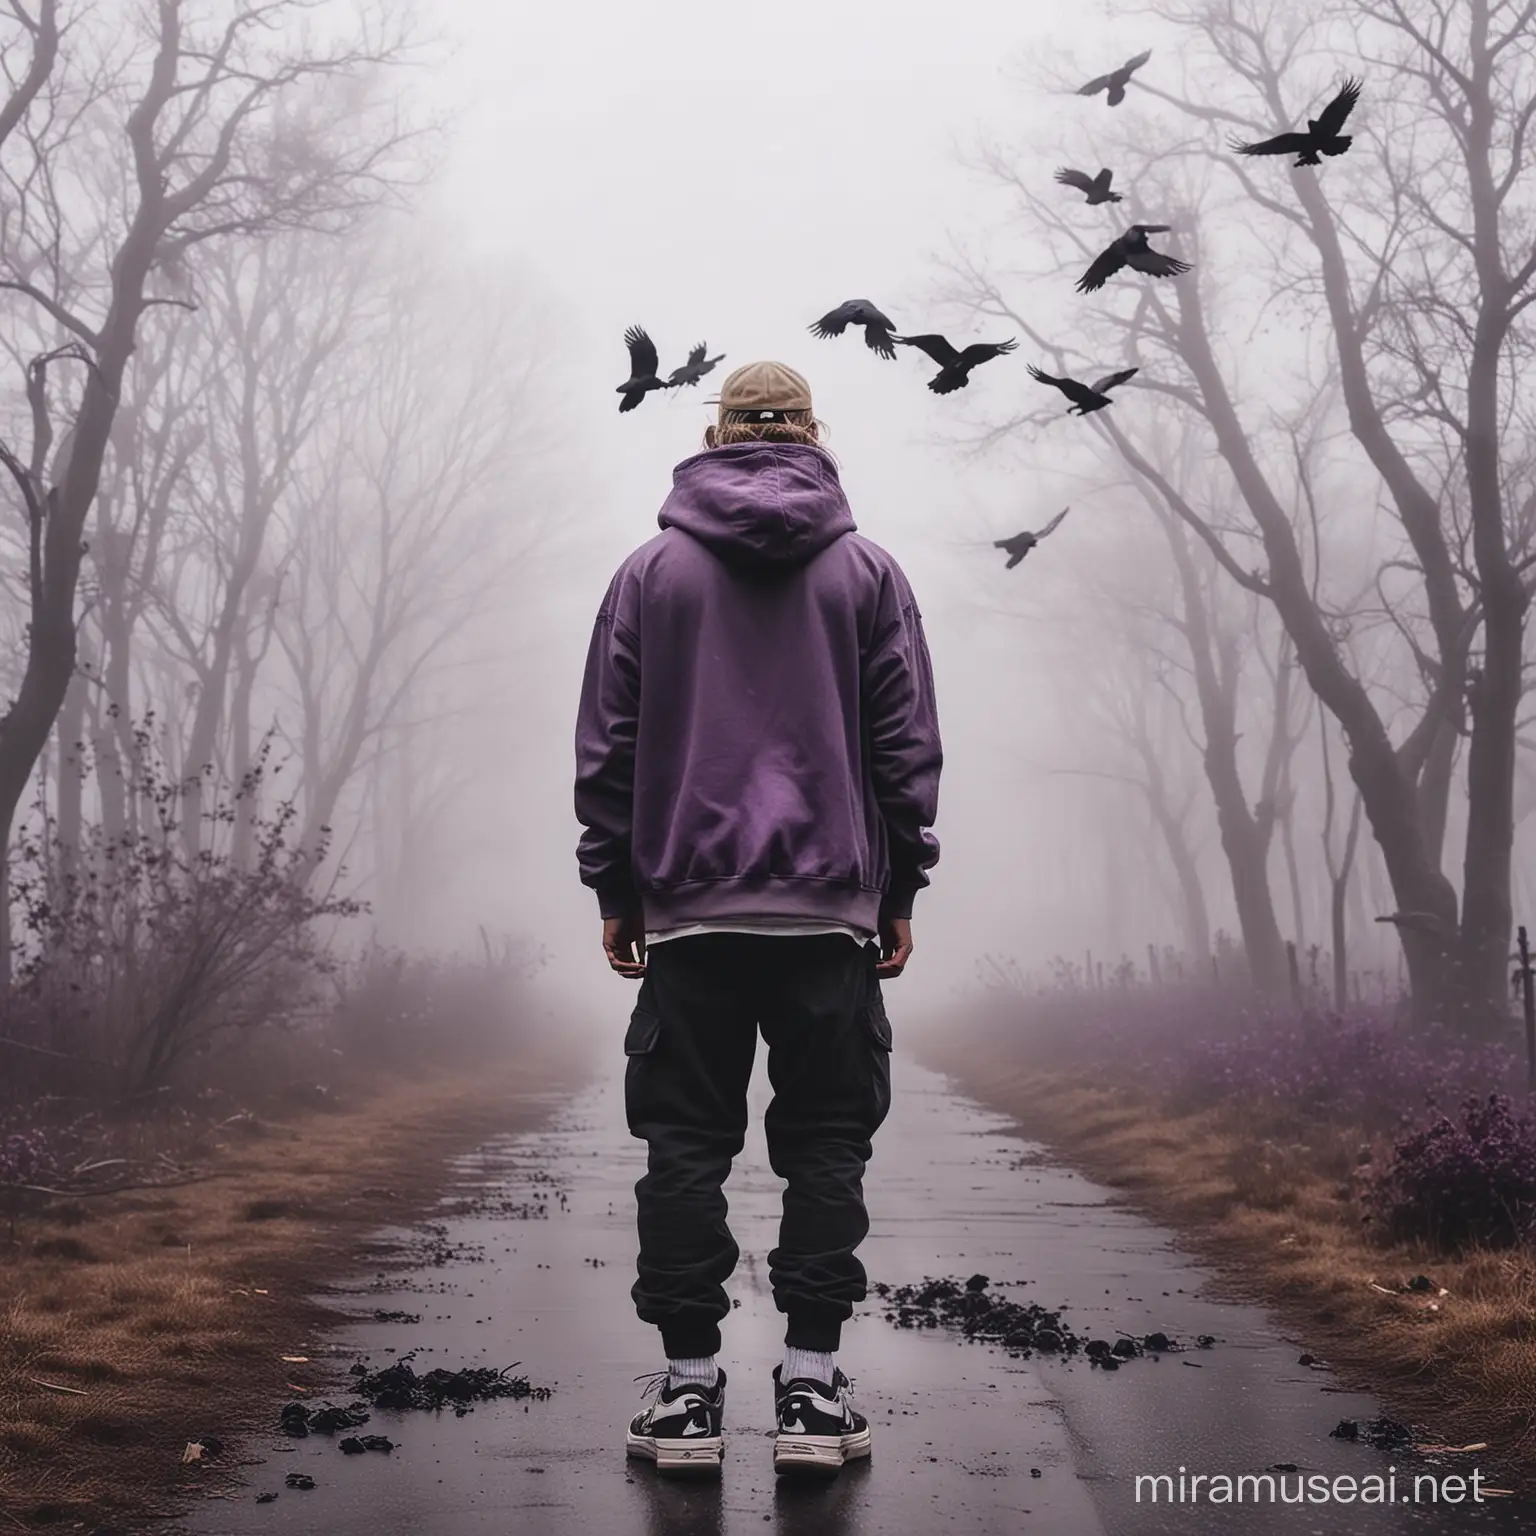 Blonde Man in Misty Twilight Surrounded by Crows